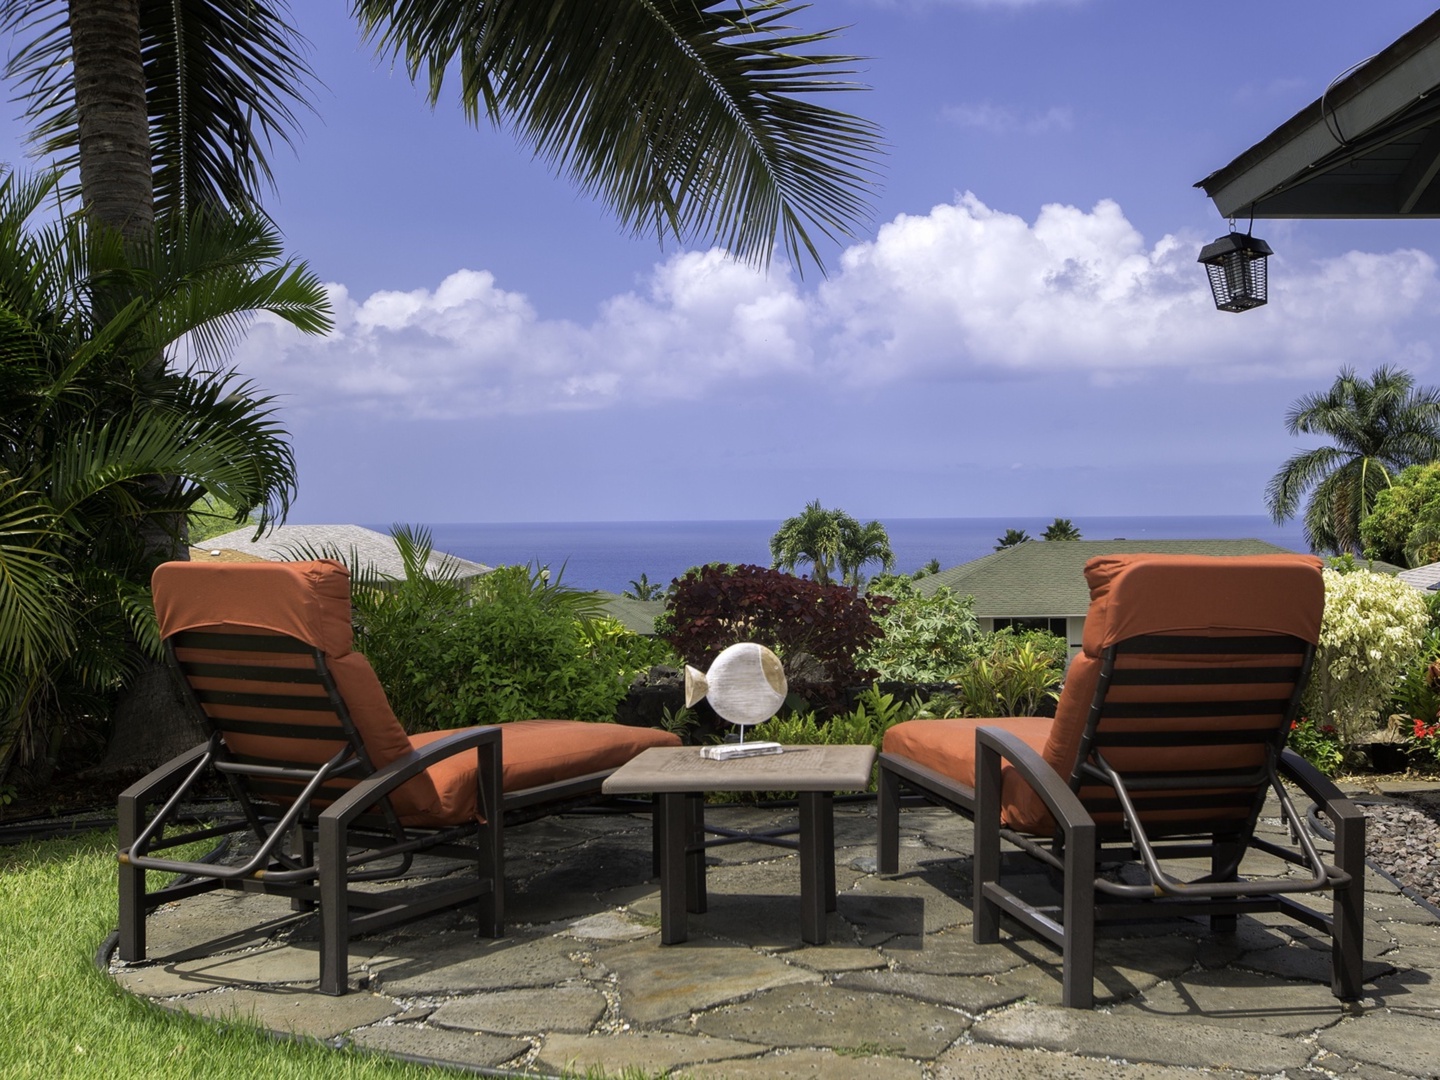 Kailua Kona Vacation Rentals, Hale Alaula - Ocean View - Relax in the outdoor lounge, offering panoramic vistas and serene ambiance.